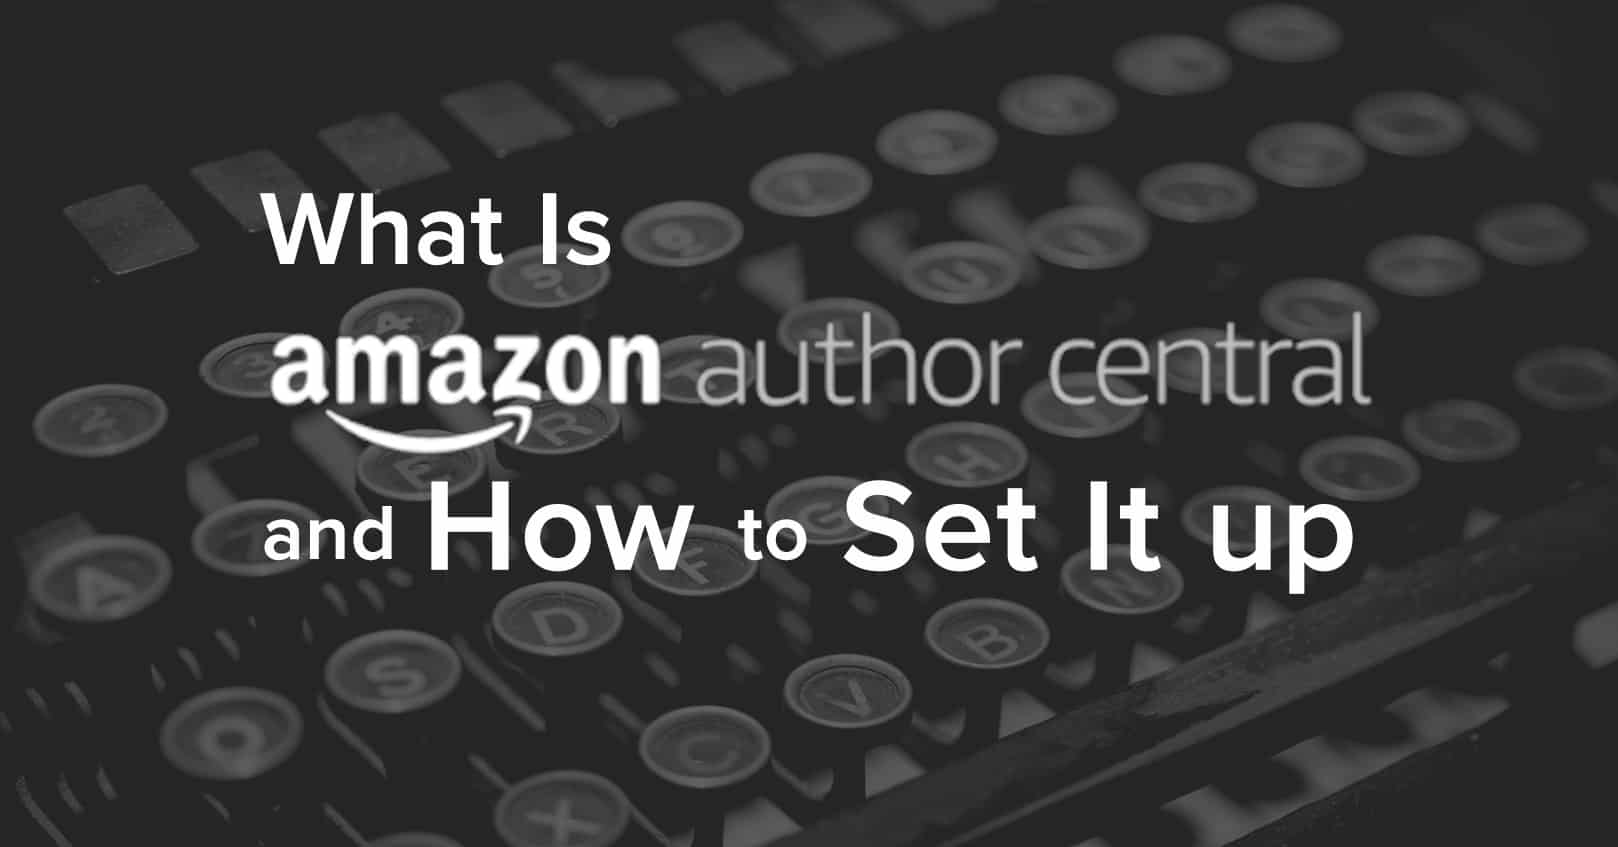 set up amazon author central and amazon author pages